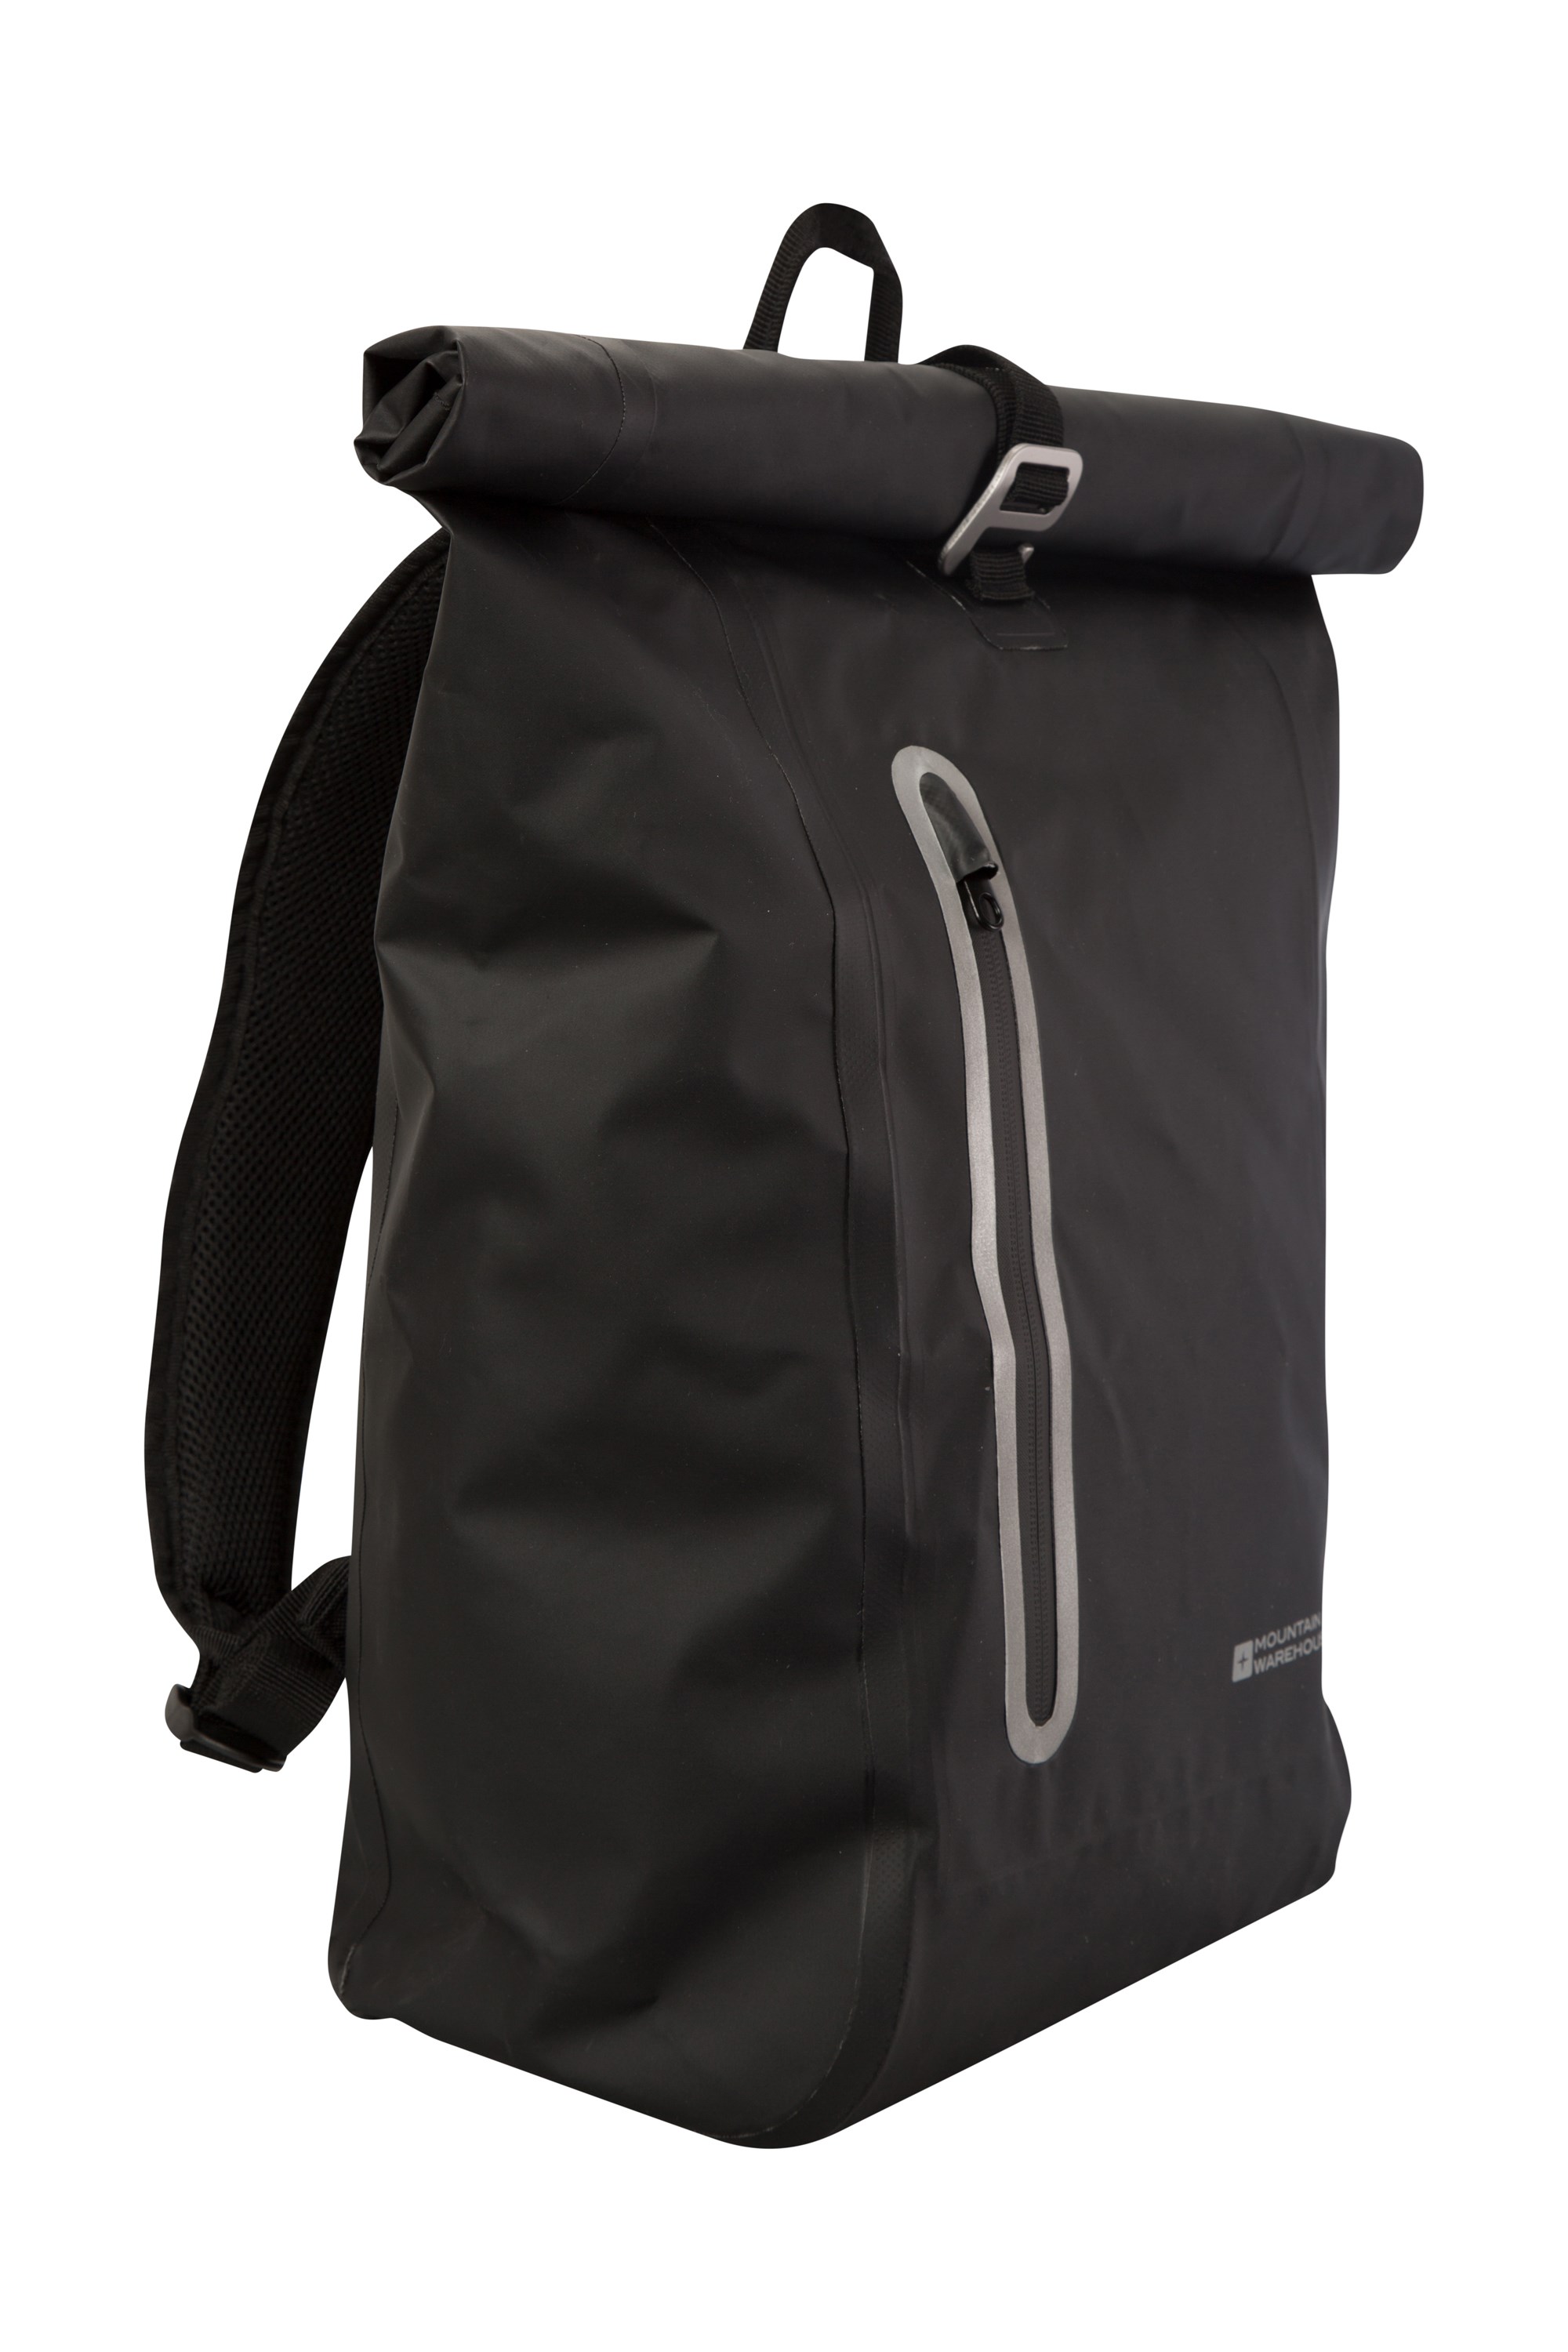 Winter Travel Rucksack Details about  / Mountain Warehouse Legion 35L Backpack